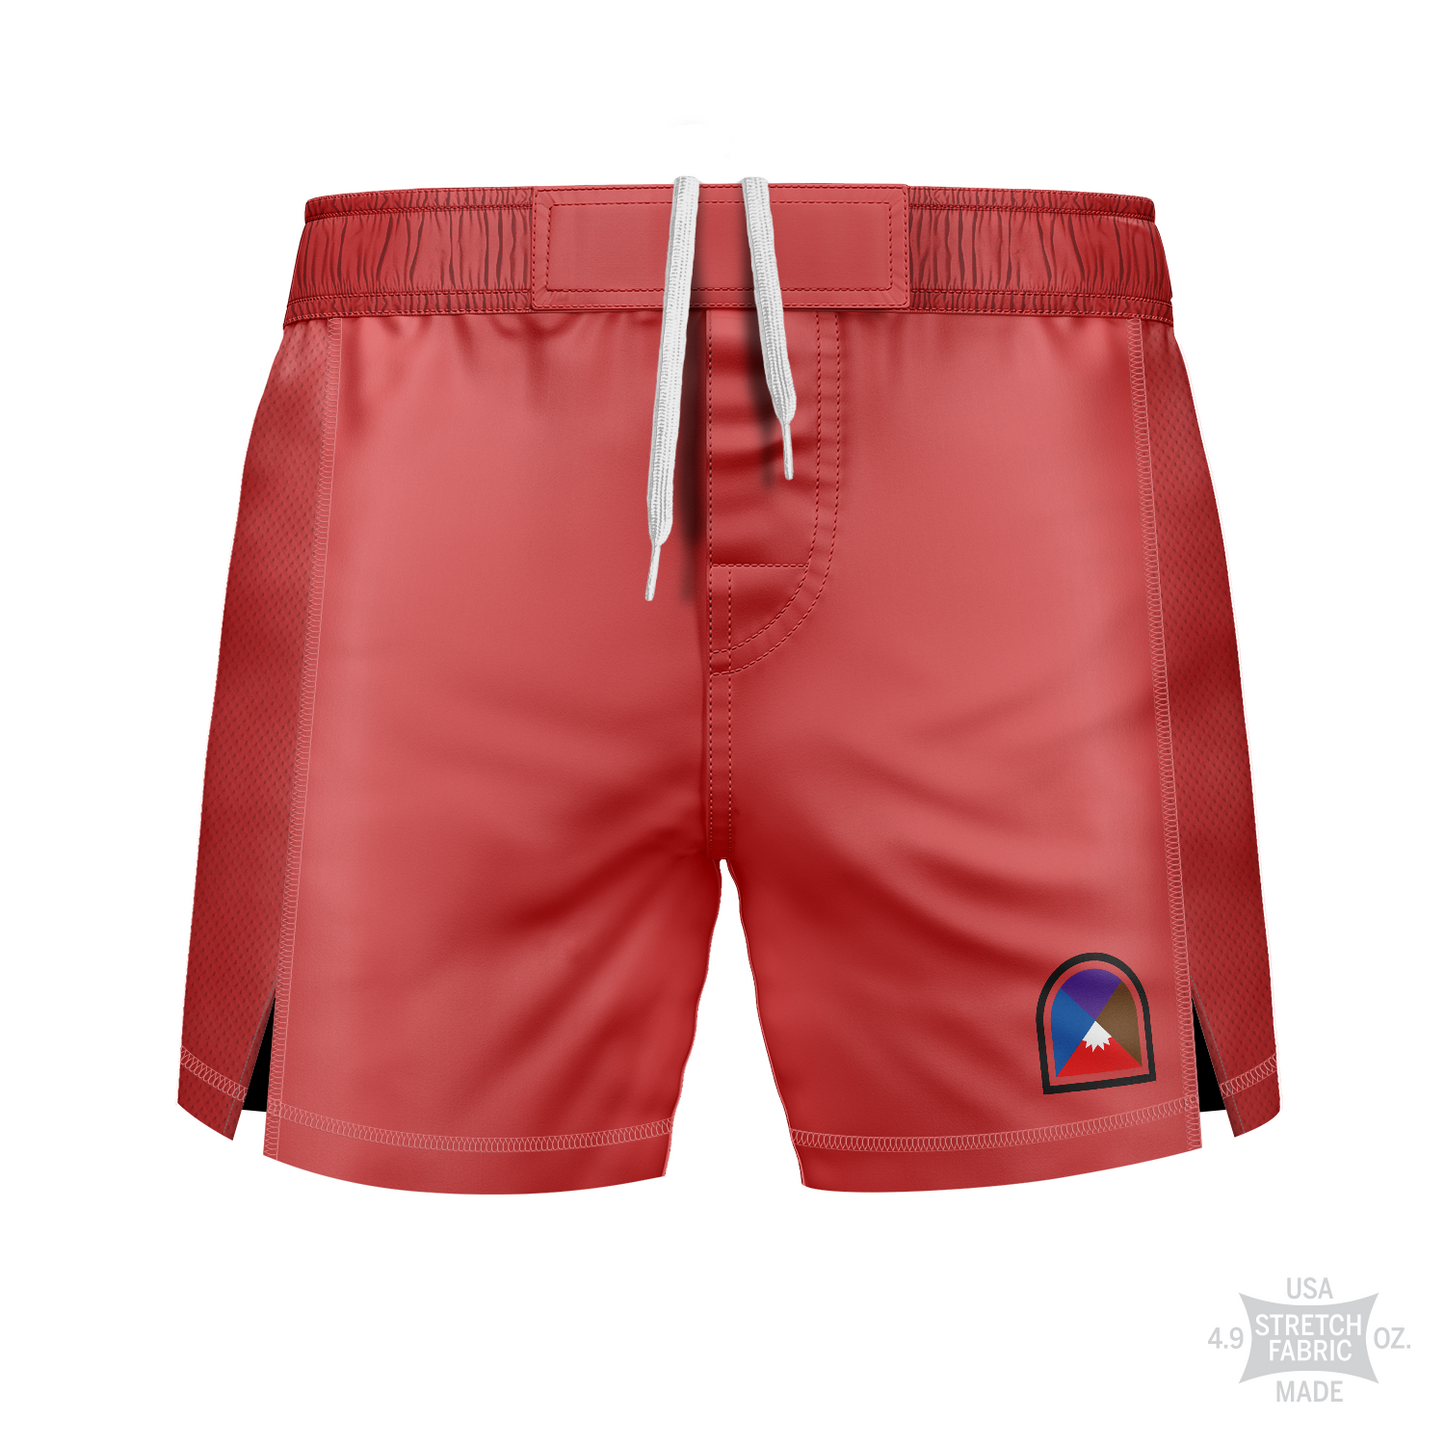 Death by Wristlock: Kimura National Park men's fight shorts, coral